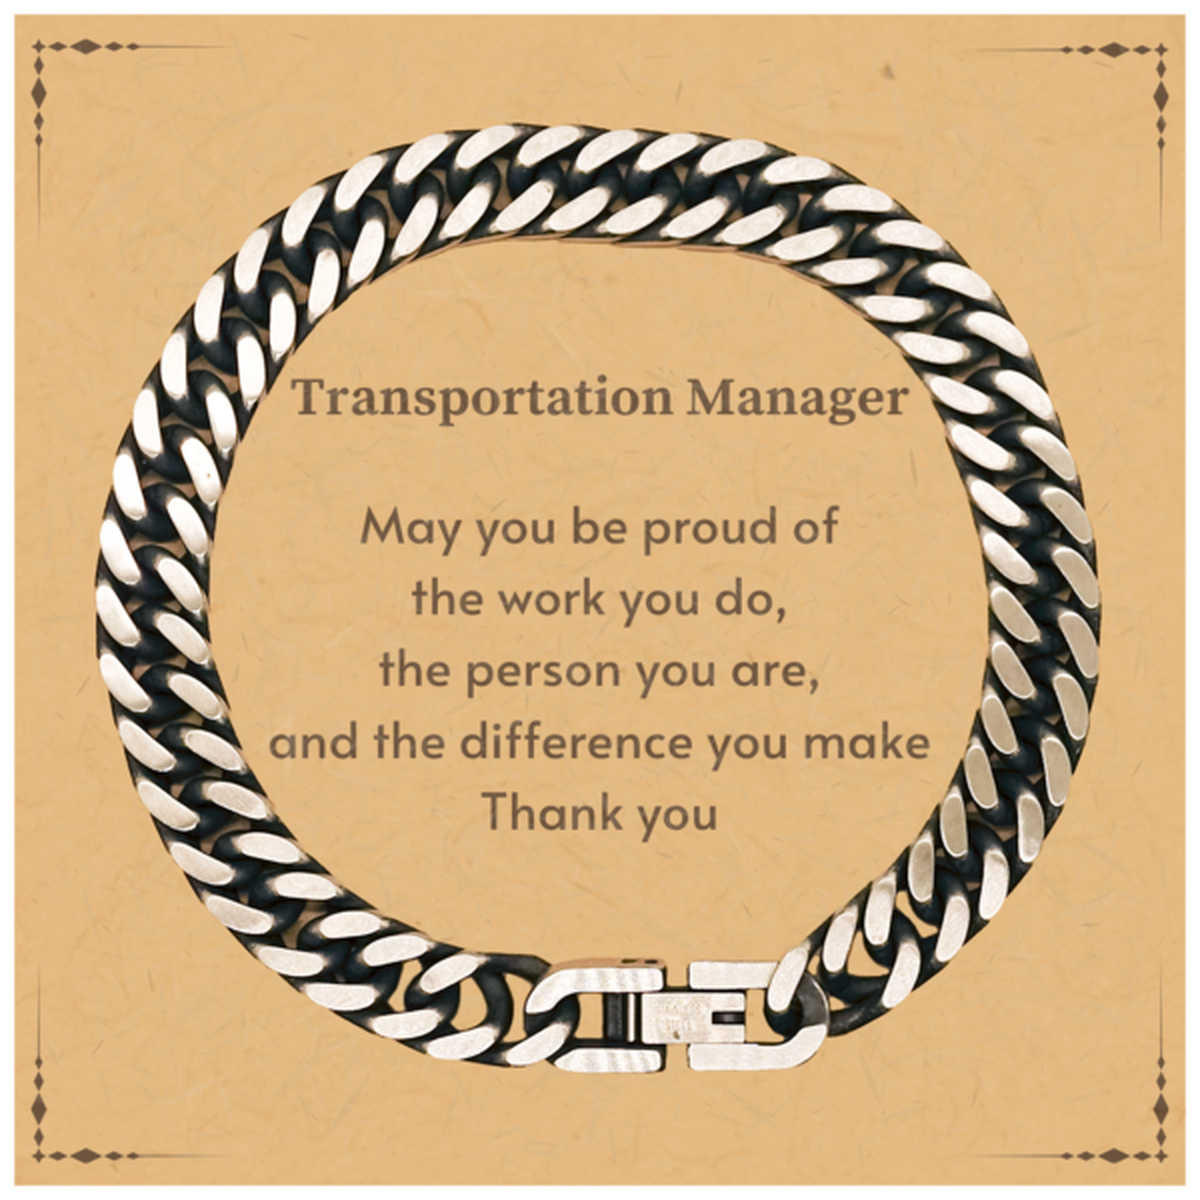 Heartwarming Cuban Link Chain Bracelet Retirement Coworkers Gifts for Transportation Manager, Transportation Manager May You be proud of the work you do, the person you are Gifts for Boss Men Women Friends